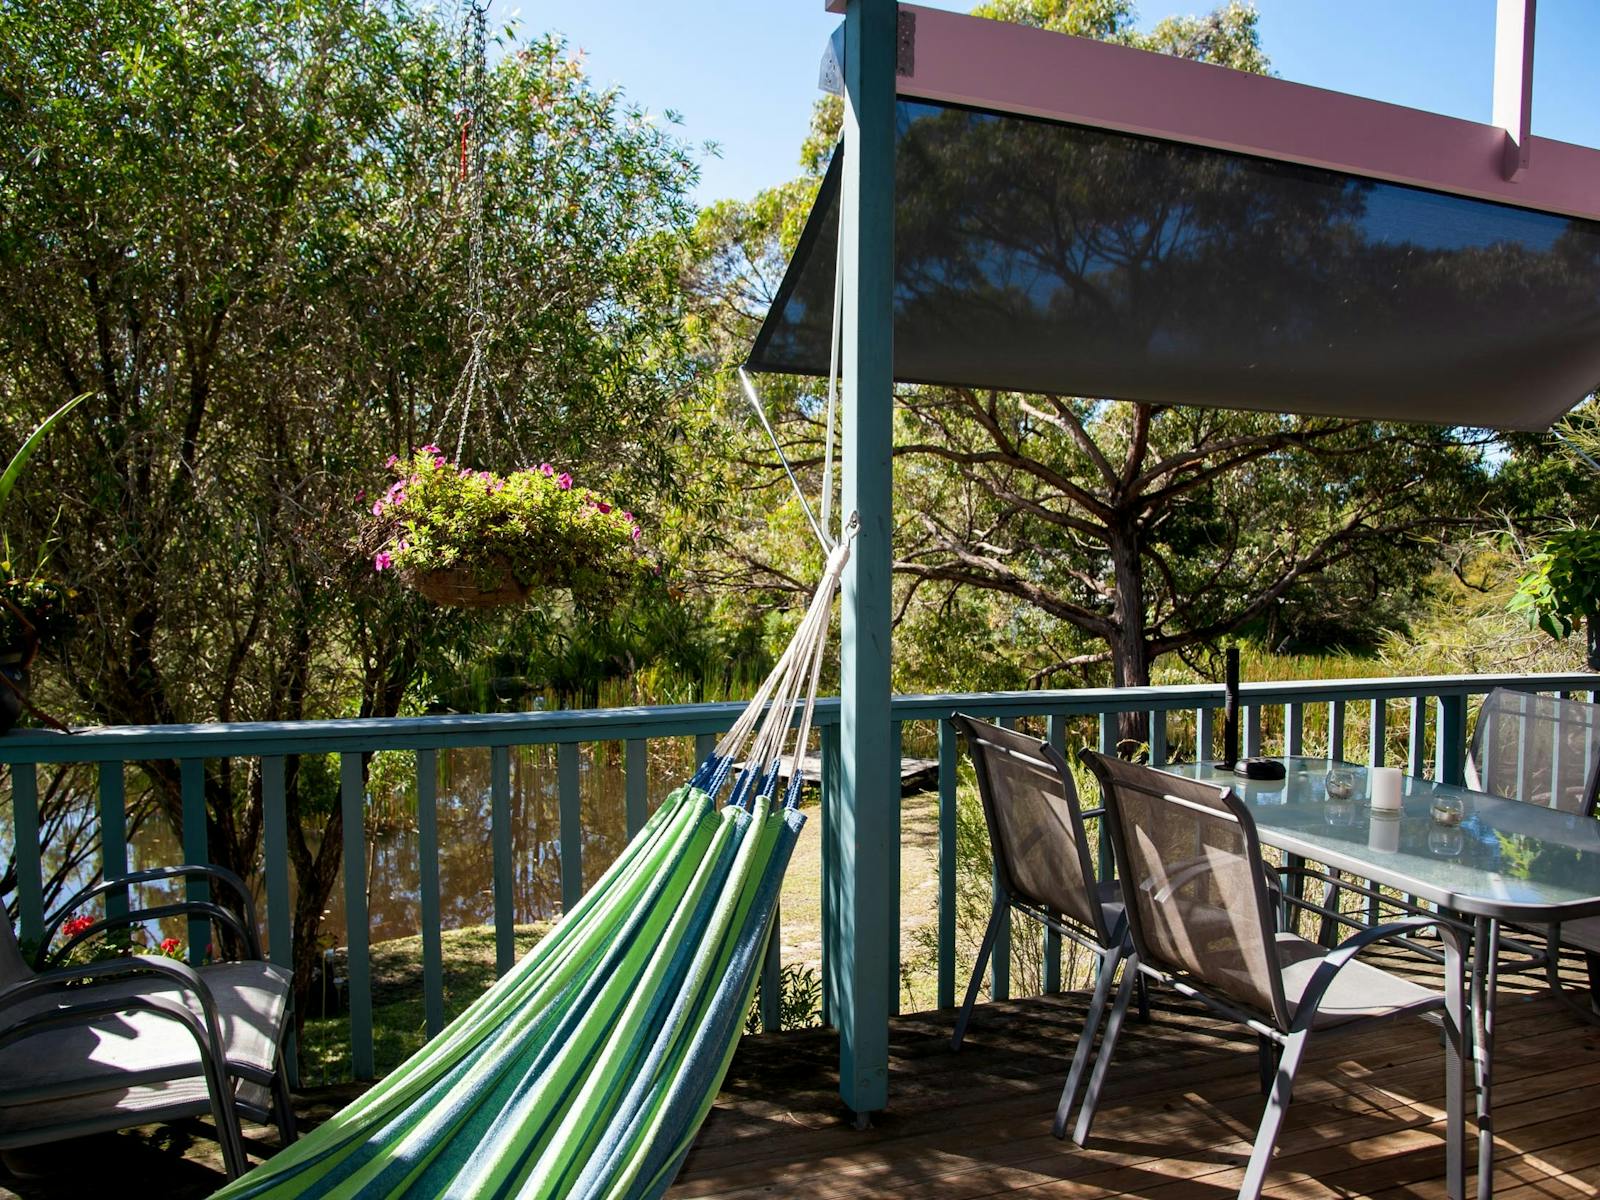 Hammocks, loungers on jetties or fire pits and stump seats...we have you covered for R & R